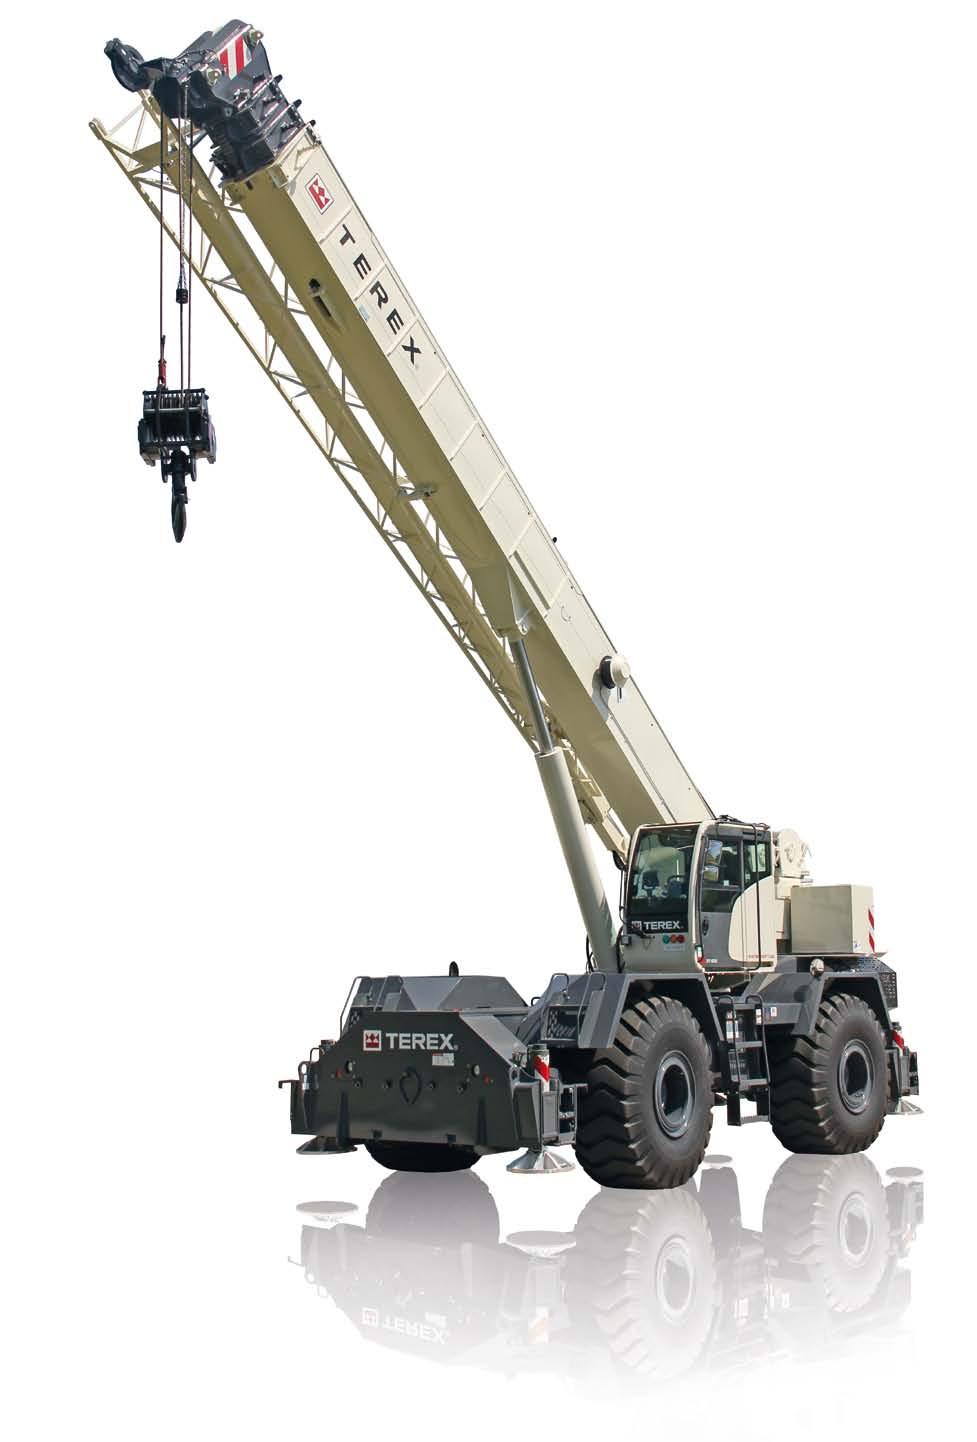 US t Liing Capacity Rough Terrain Cranes Datasheet Imperial Features Rated